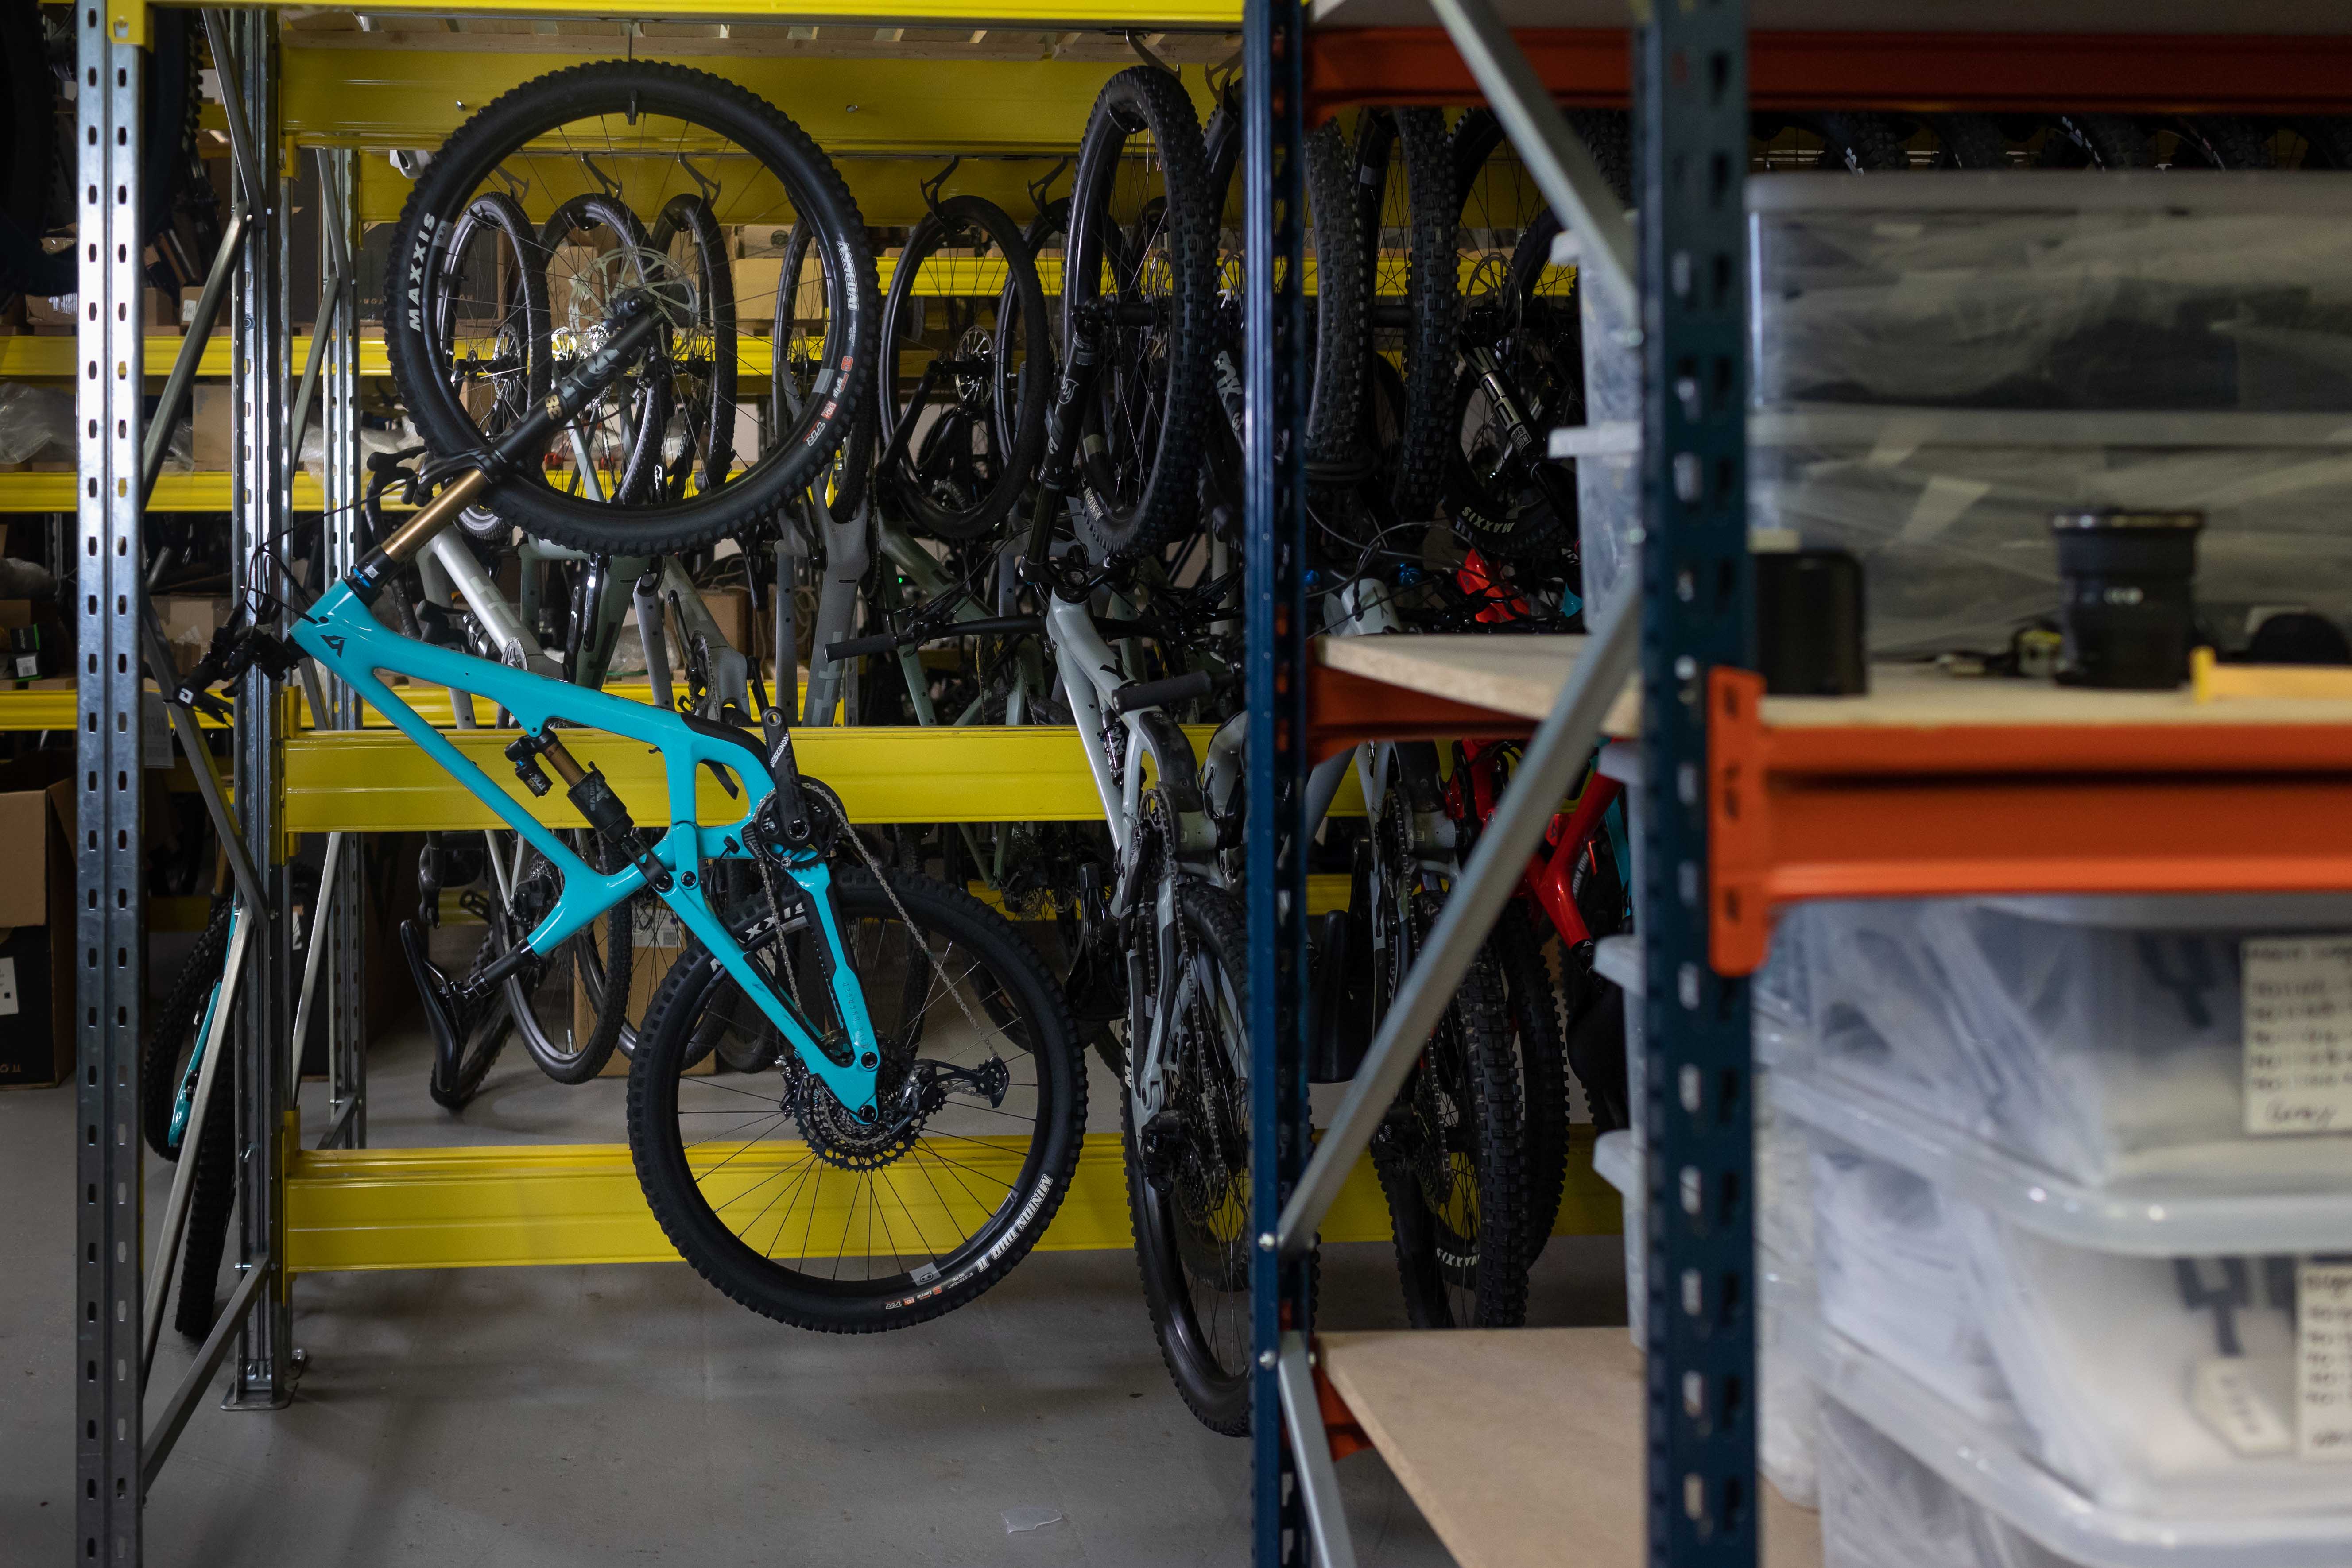 bike storage system also can be used as a display unit